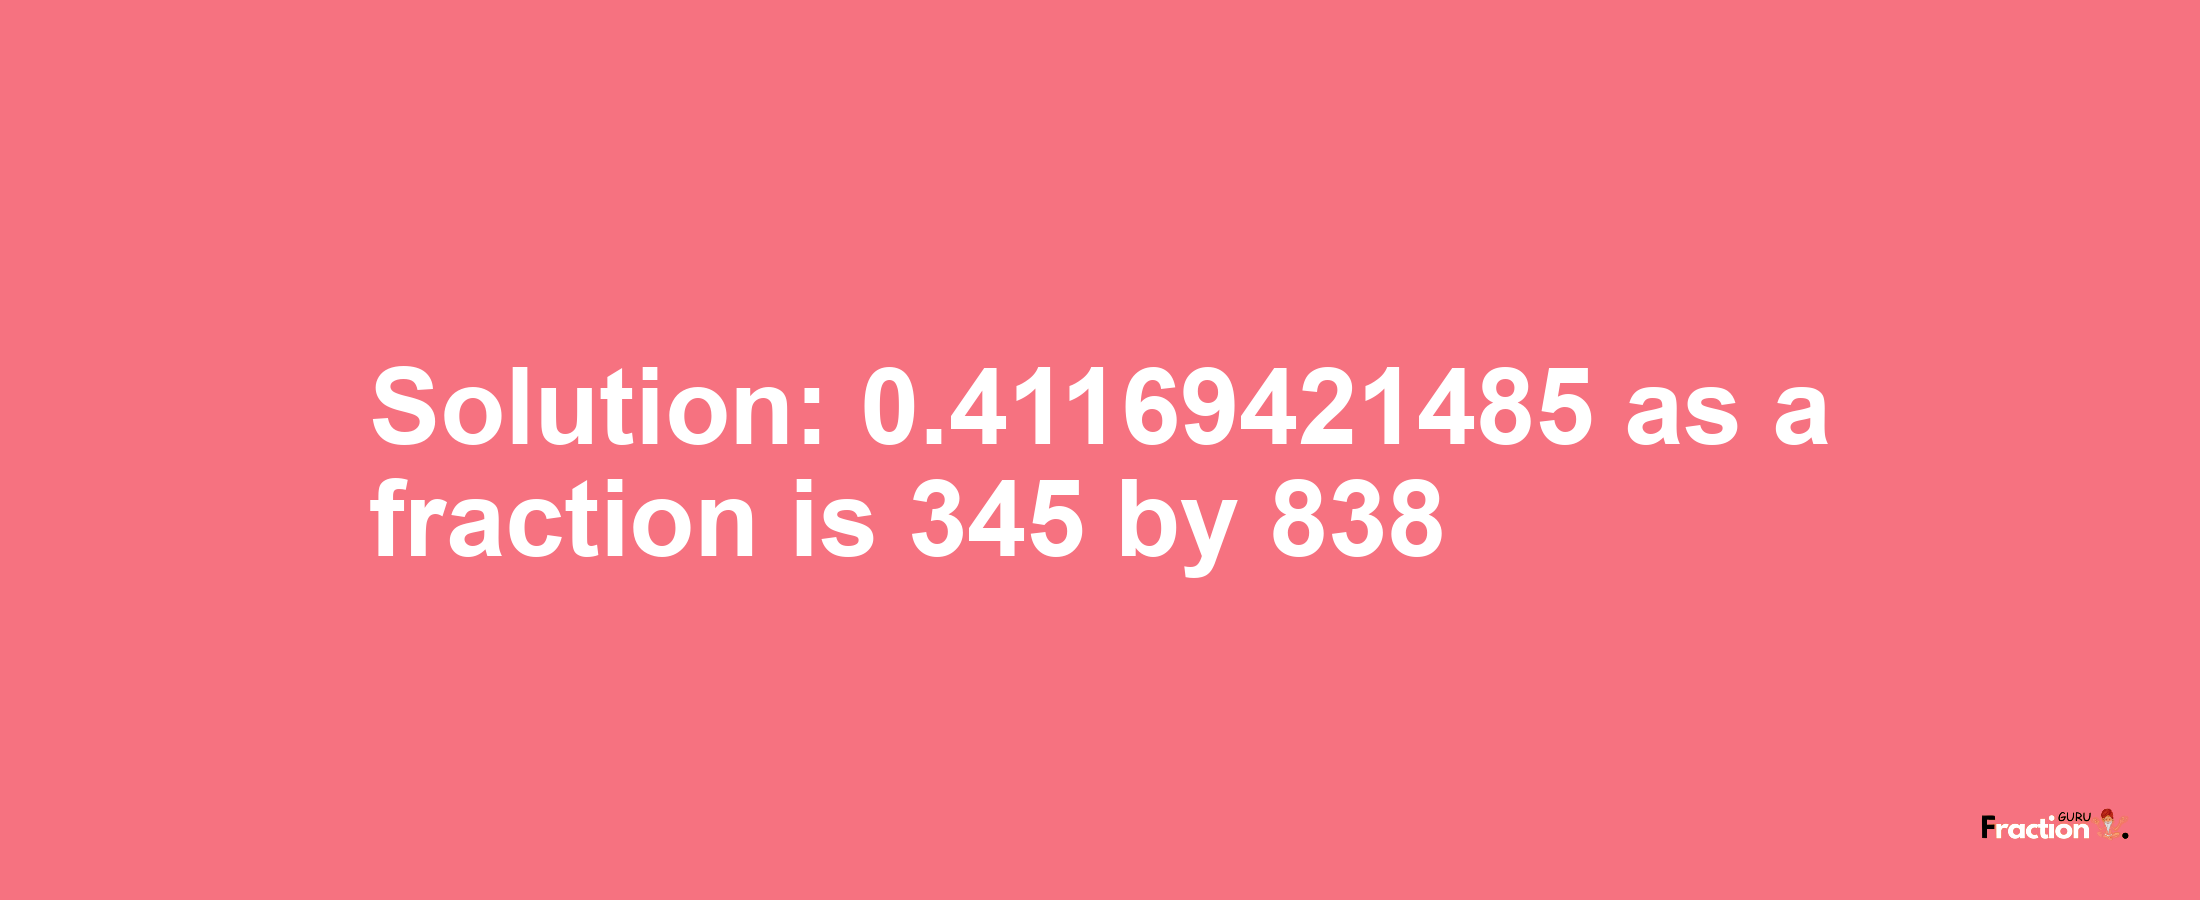 Solution:0.41169421485 as a fraction is 345/838